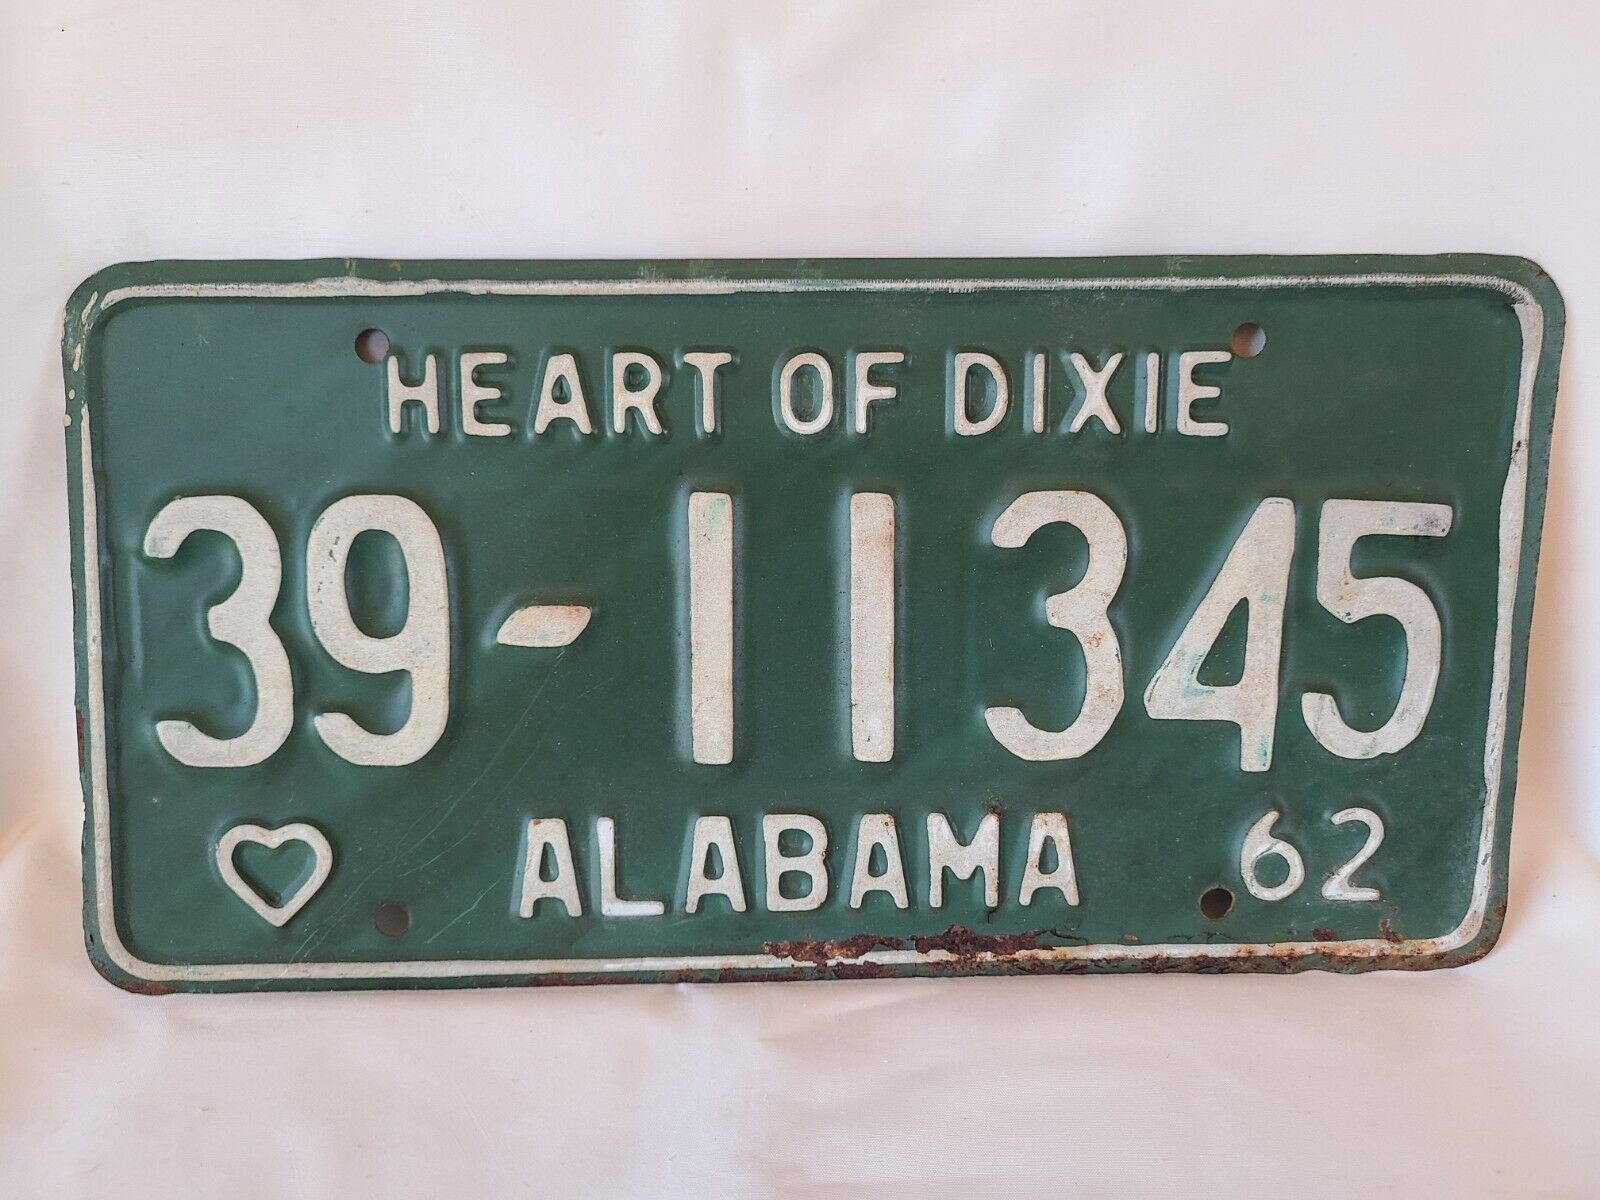 Vintage 1962 Alabama Heart Of Dixie 39 11345 License Plate 0224